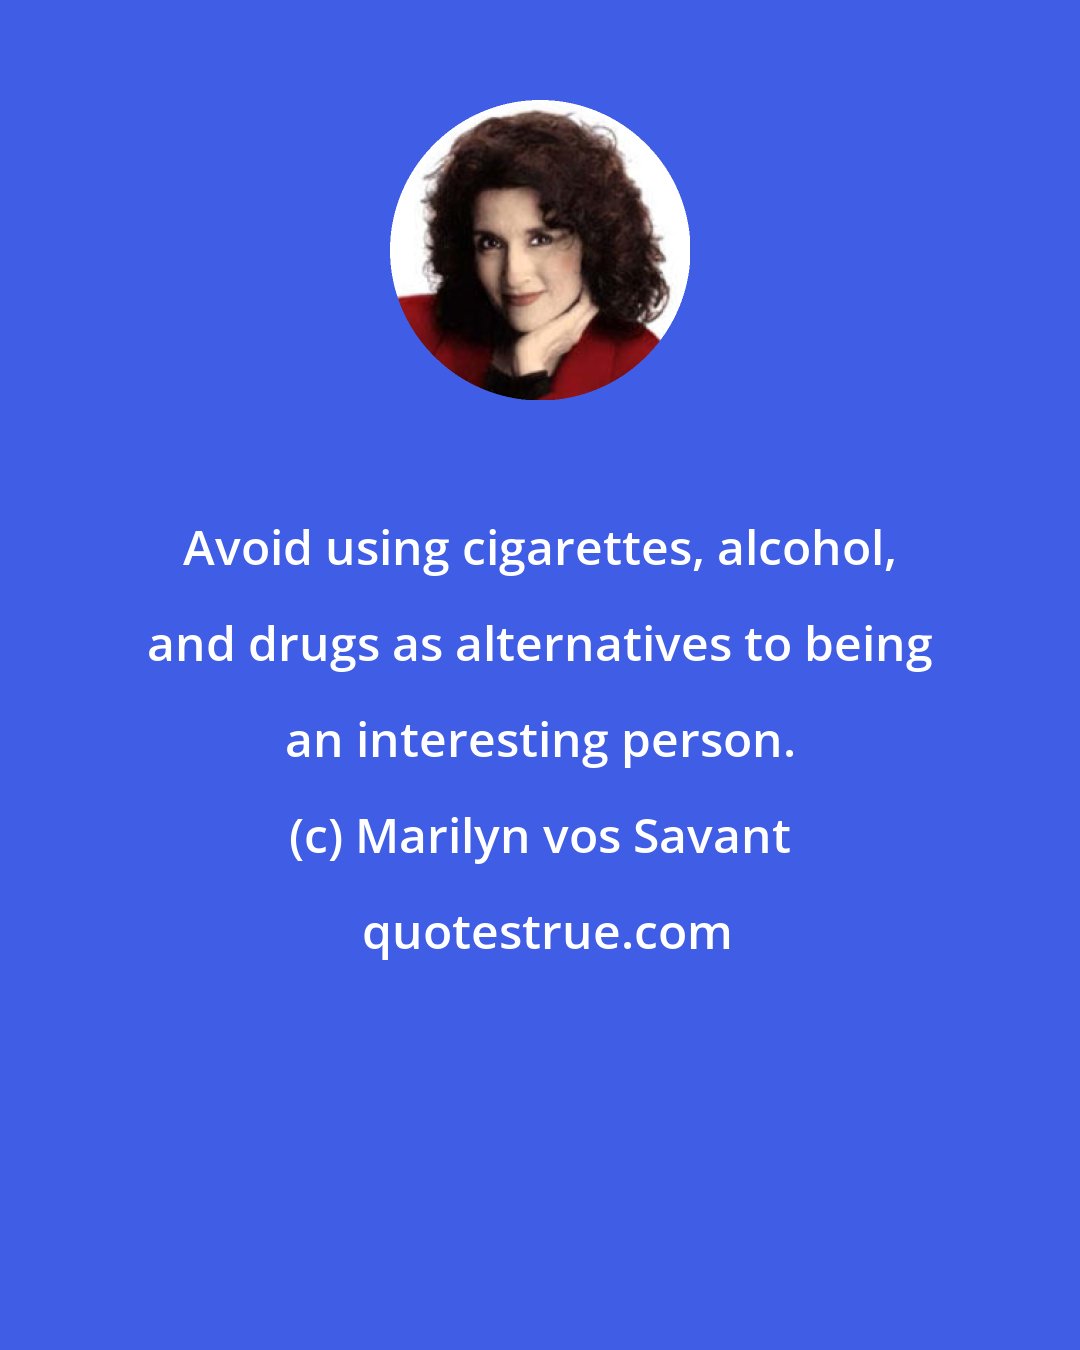 Marilyn vos Savant: Avoid using cigarettes, alcohol, and drugs as alternatives to being an interesting person.